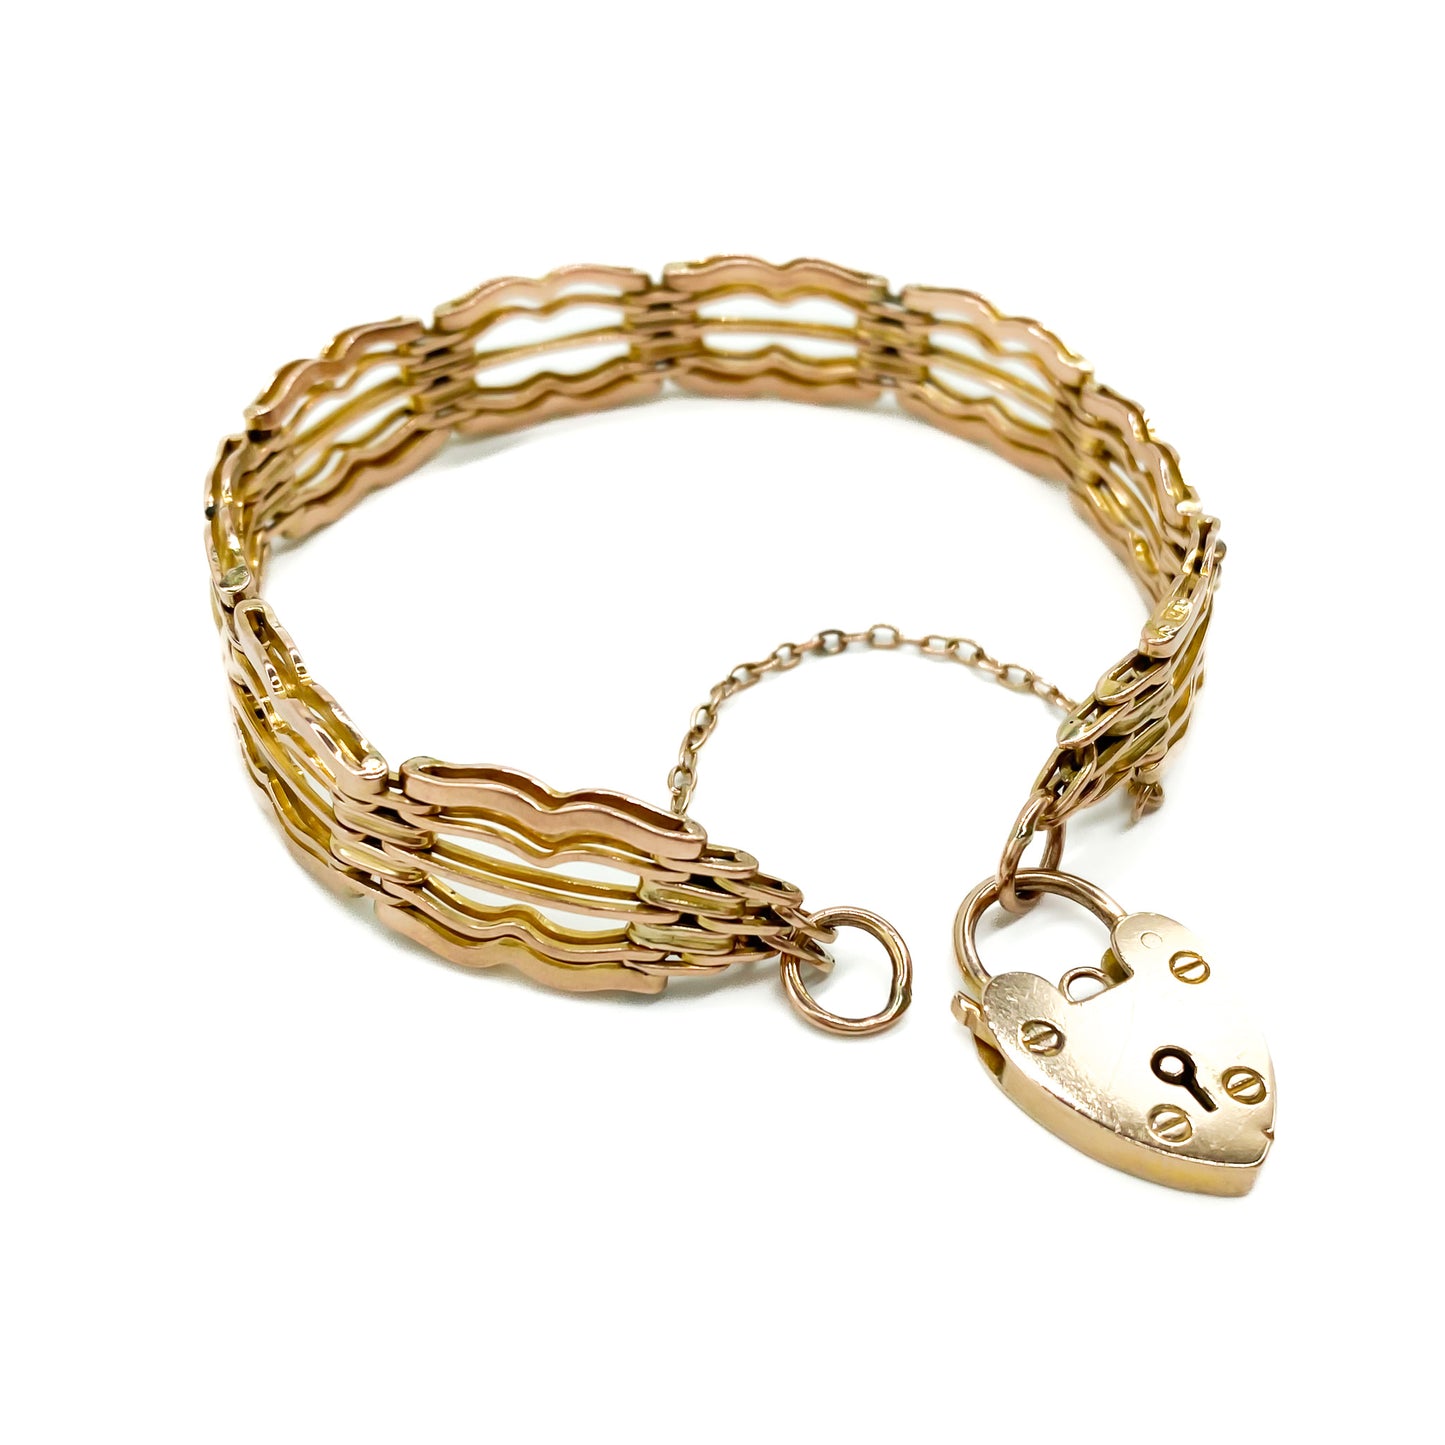 Stylish Victorian 9ct rose gold gateleg bracelet with a padlock and safety chain.